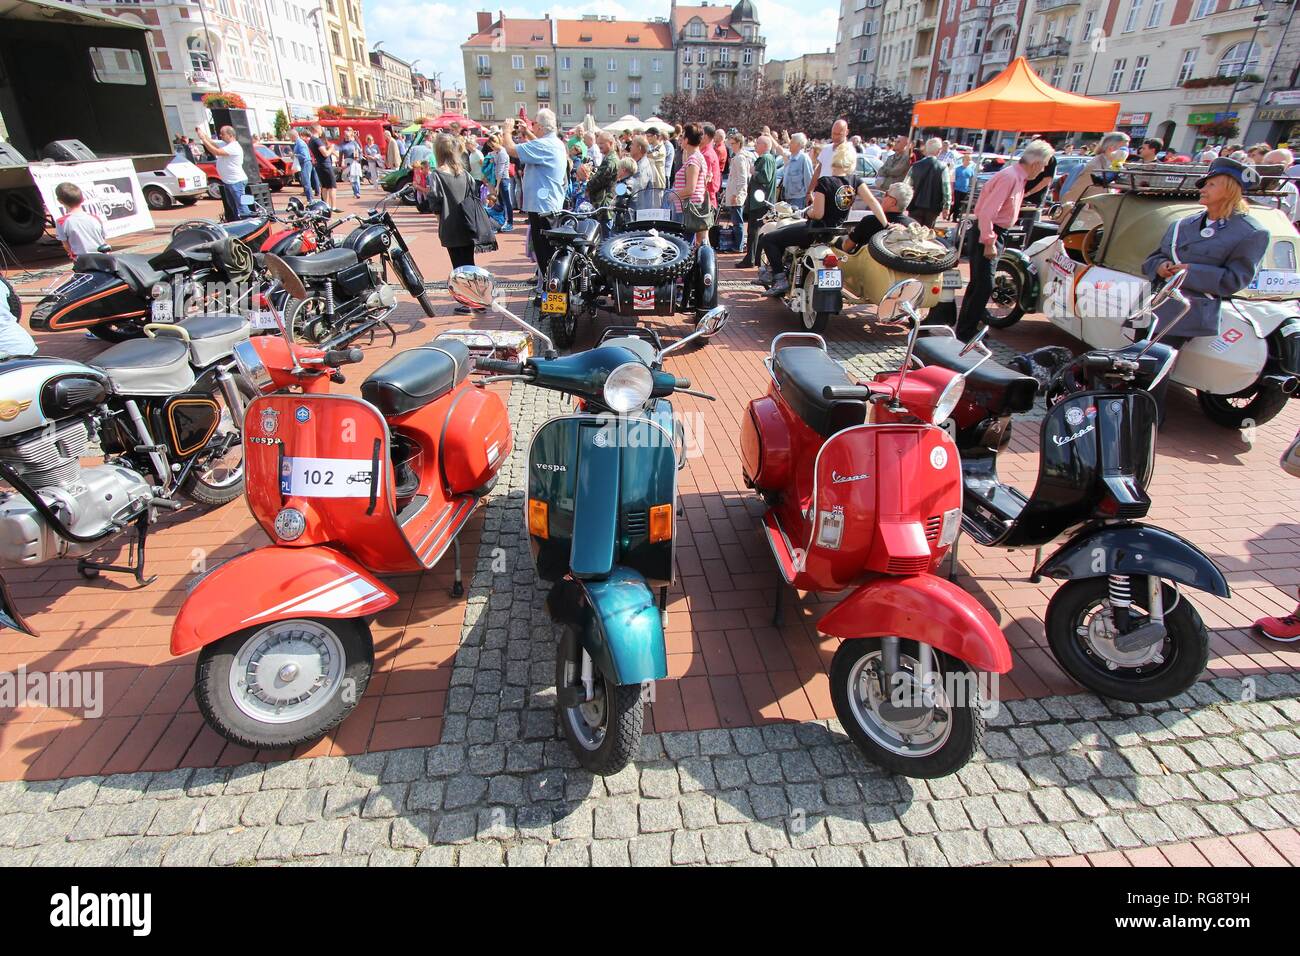 BYTOM, POLAND - SEPTEMBER 12, 2015: People admire Piaggio Vespa motorcycles during 12th Historic Vehicle Rally in Bytom. The annual vehicle parade is  Stock Photo